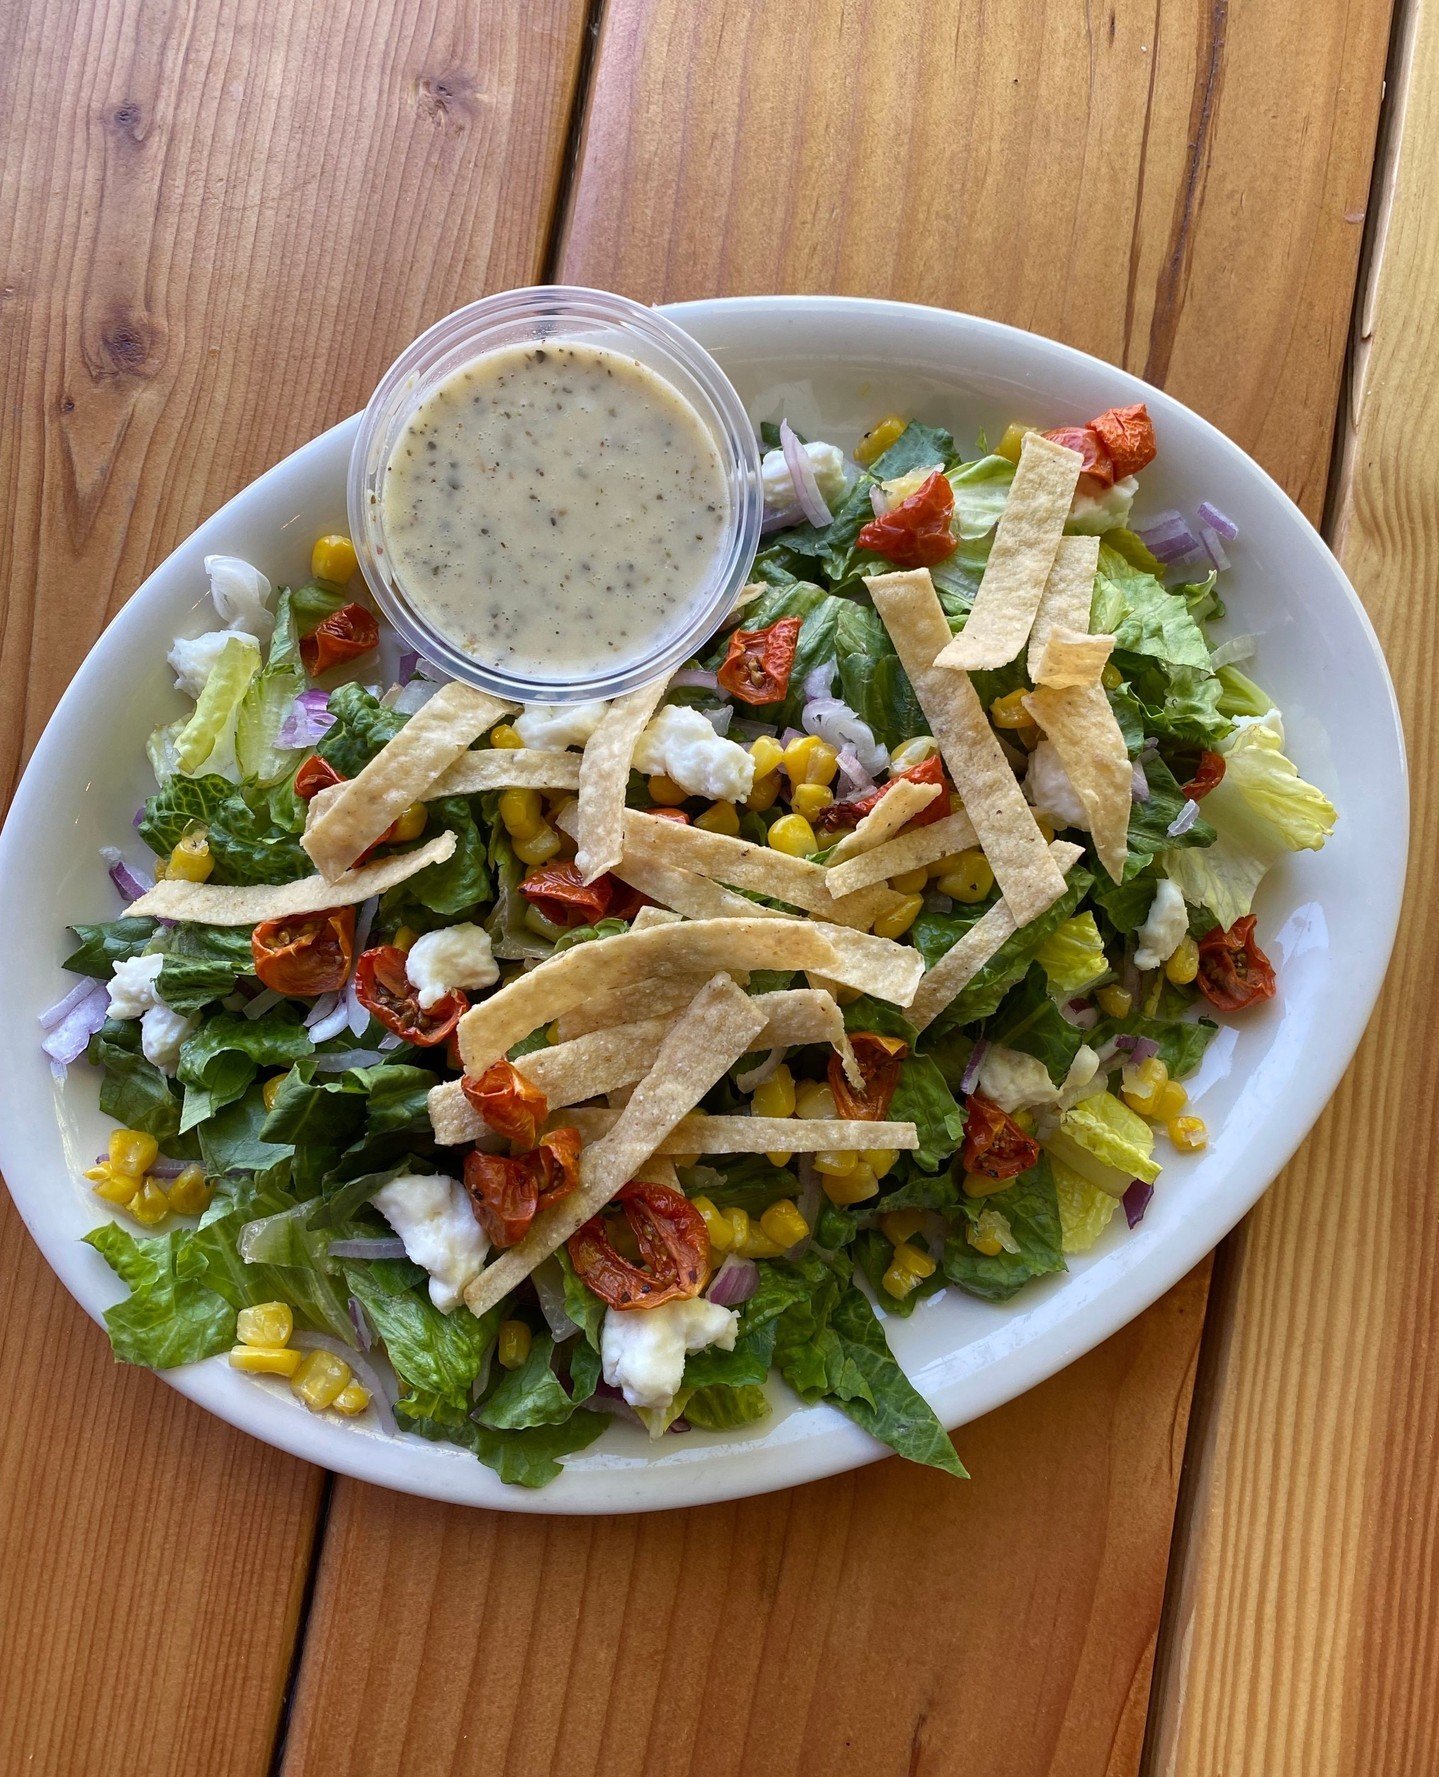 𝗡𝗲𝘄 𝗼𝗻 𝘁𝗵𝗲 𝗠𝗲𝗻𝘂: 𝗦𝗼𝘂𝘁𝗵𝘄𝗲𝘀𝘁 𝗦𝗮𝗹𝗮𝗱⁠
A light &amp; fresh seasonal salad fit for warmer weather! Crunchy romaine topped with roasted corn, dried tomatoes, chopped red onion, and creamy queso fresco. Garnished with fried tortilla